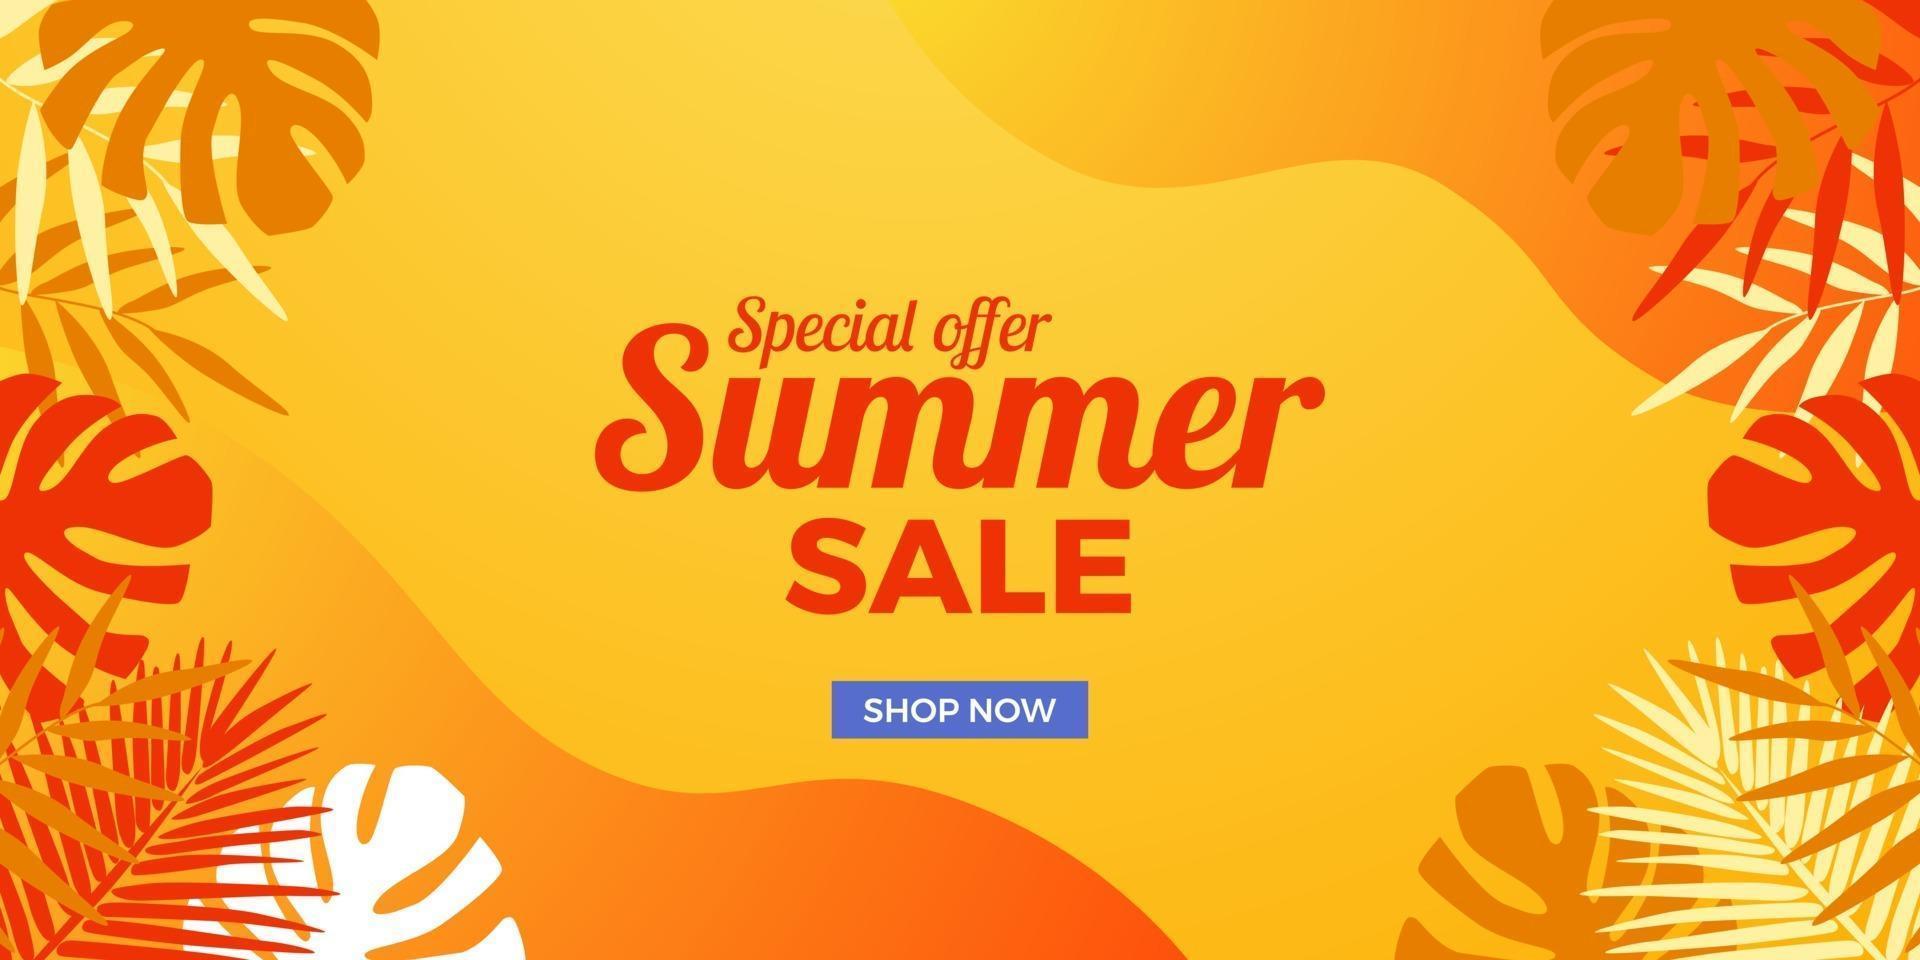 Summer sale offer discount promotion banner with leaves abstract memphis decoration and orange background vector